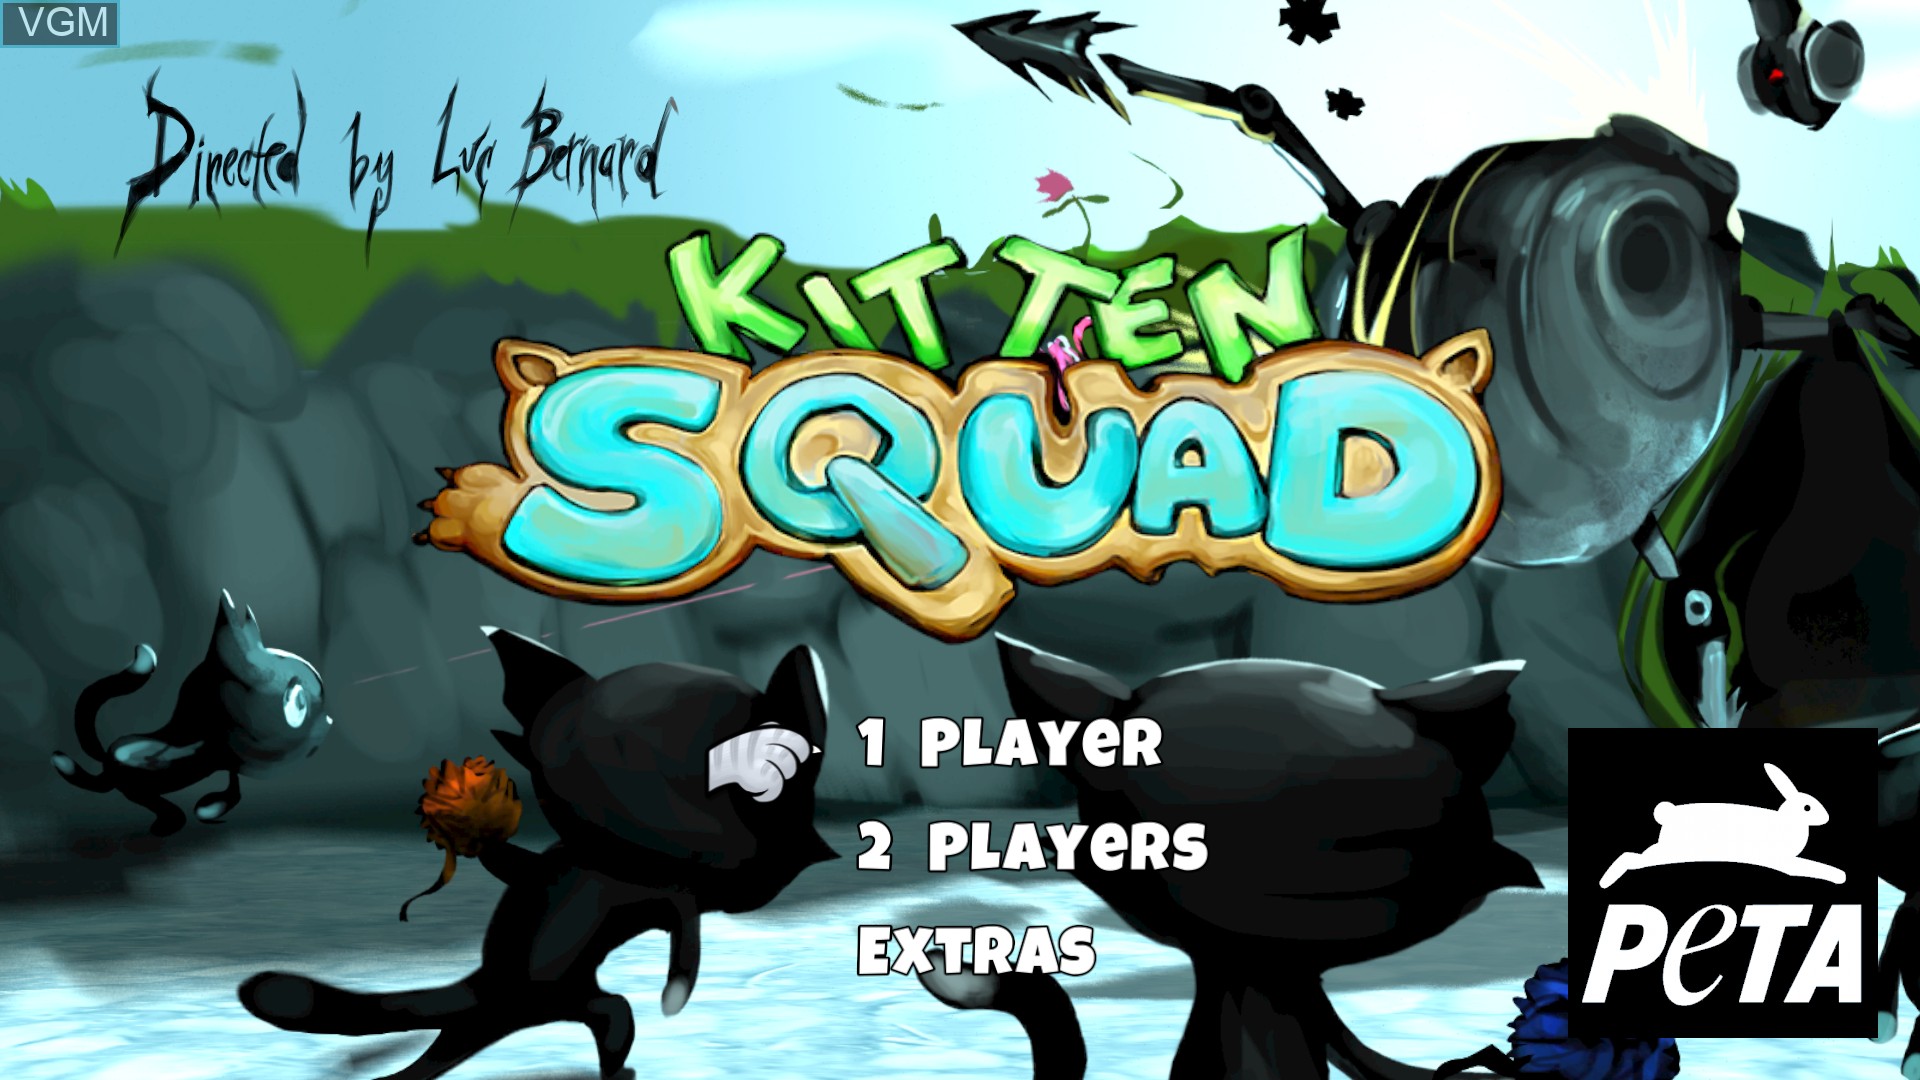 Menu screen of the game Kitten Squad on Sony Playstation 4